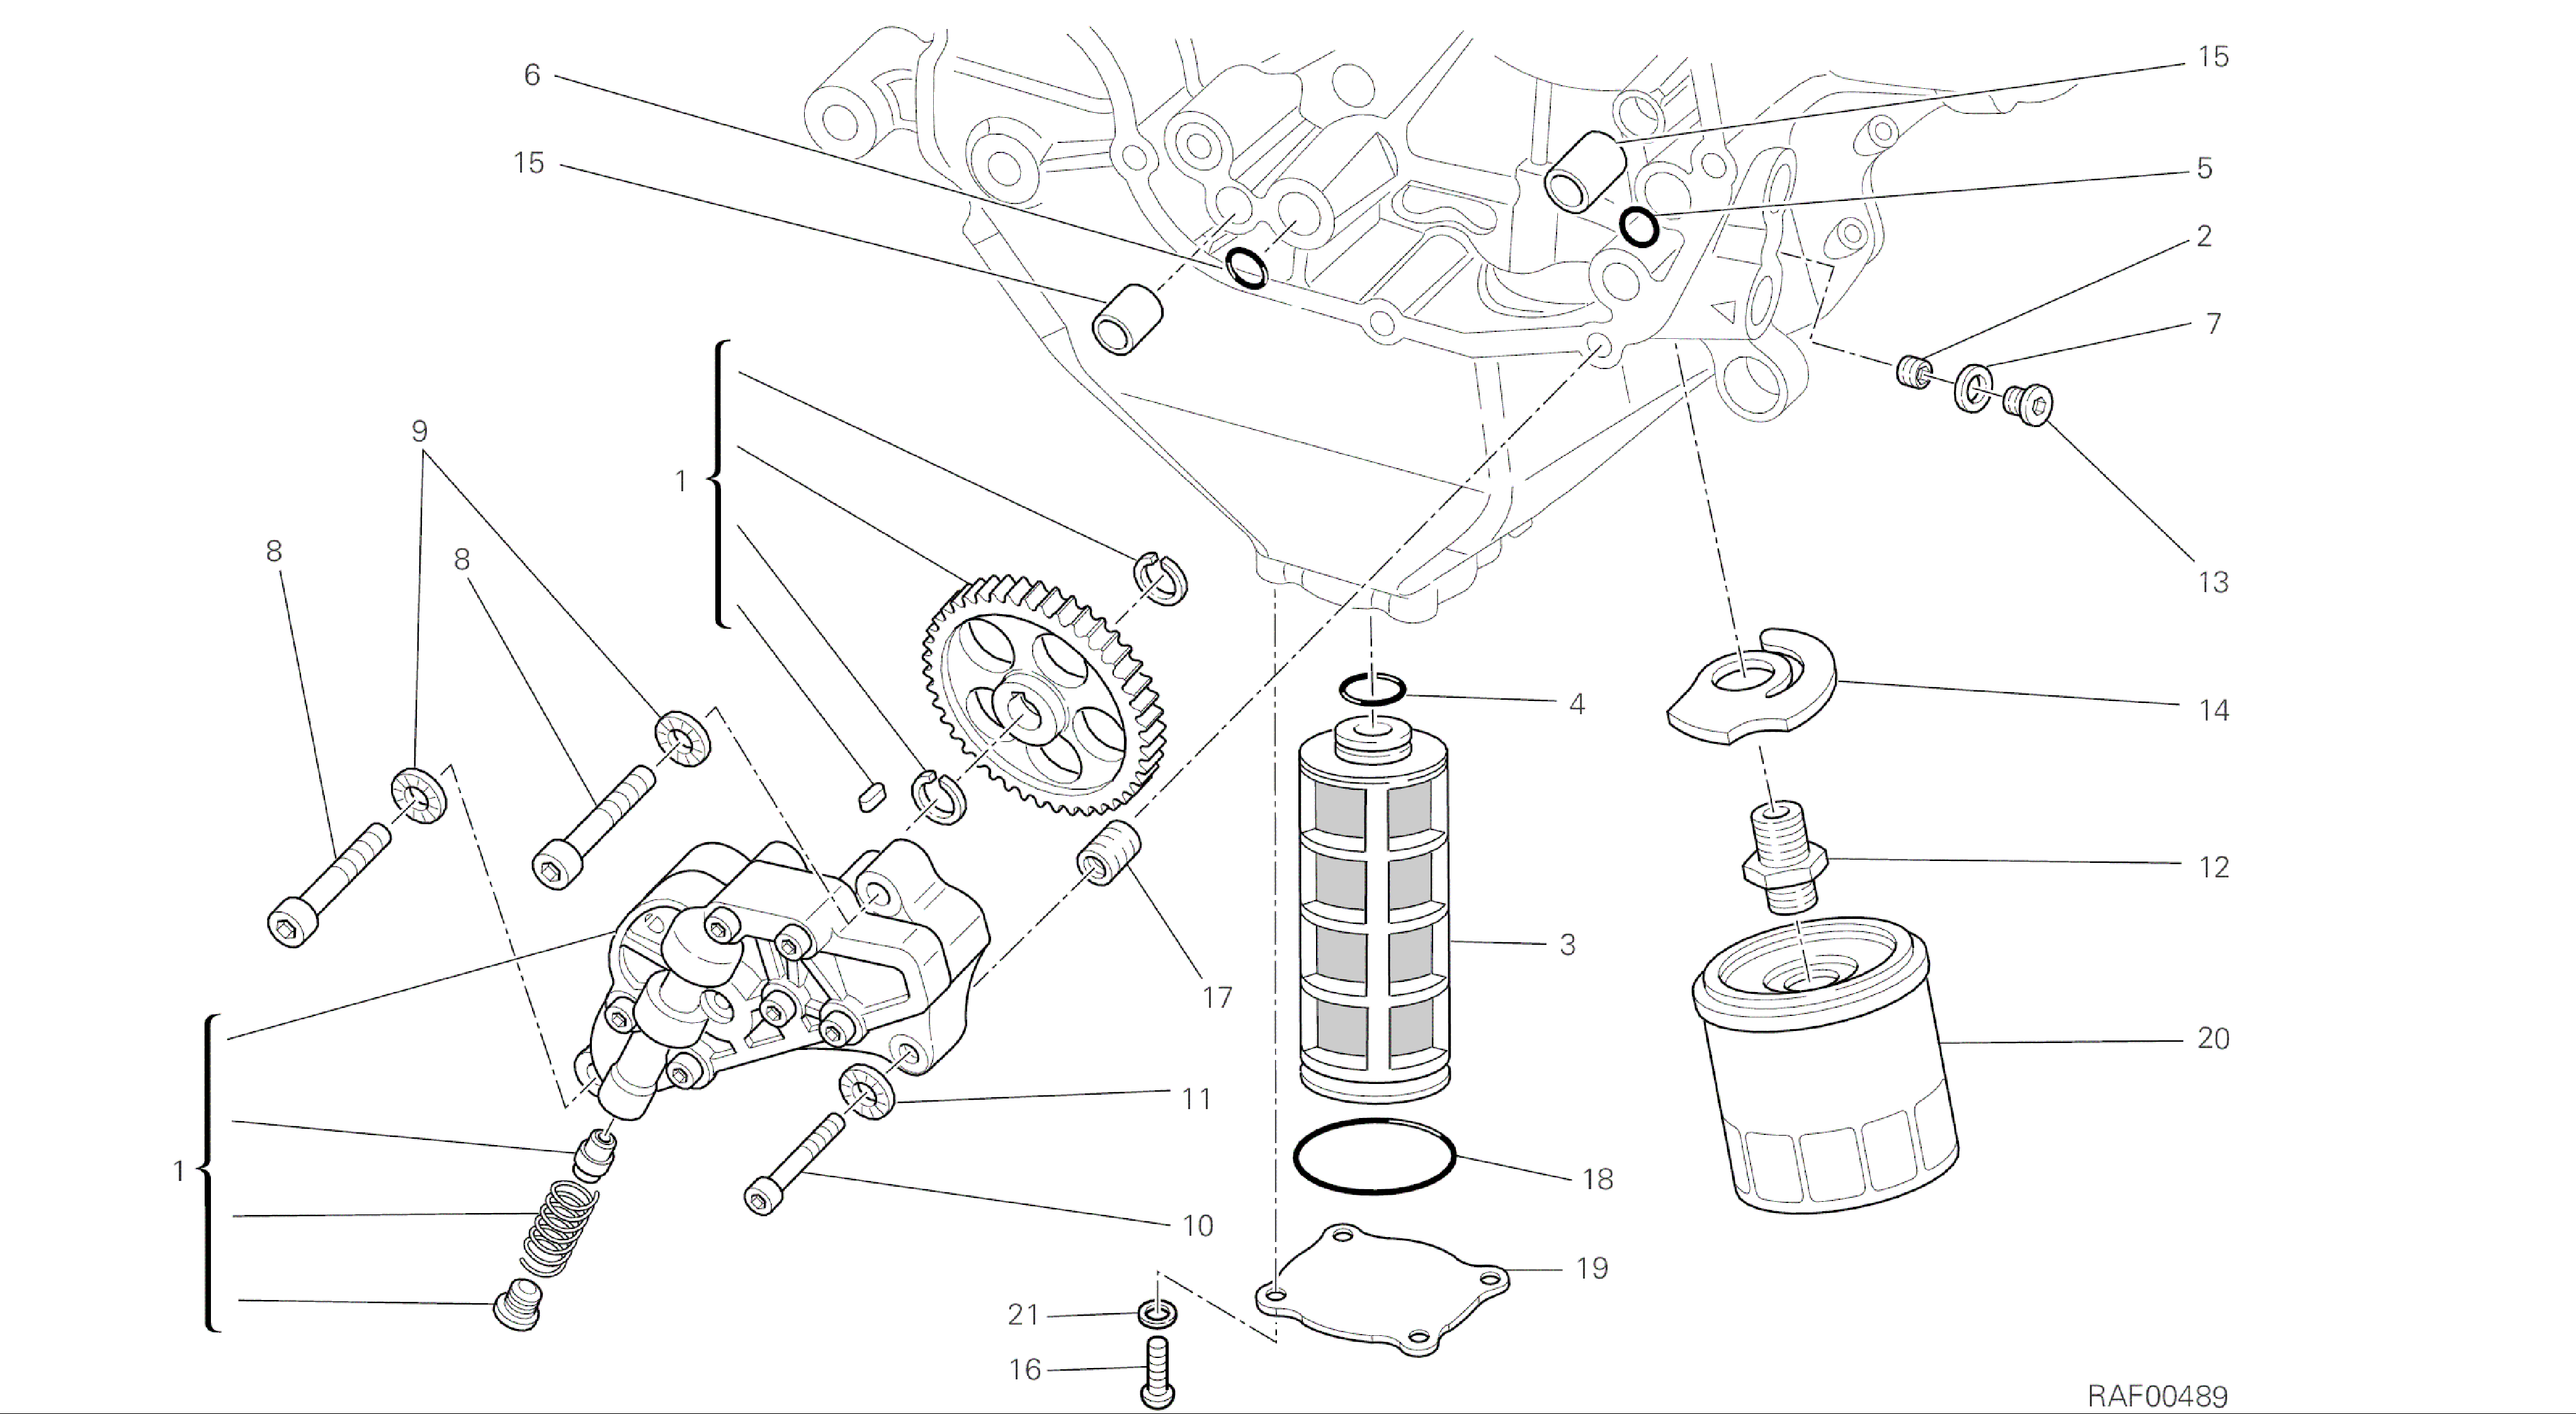 DRAWING 009 - OIL PUMP - FILTER [MOD:F848]GROUP ENGINE